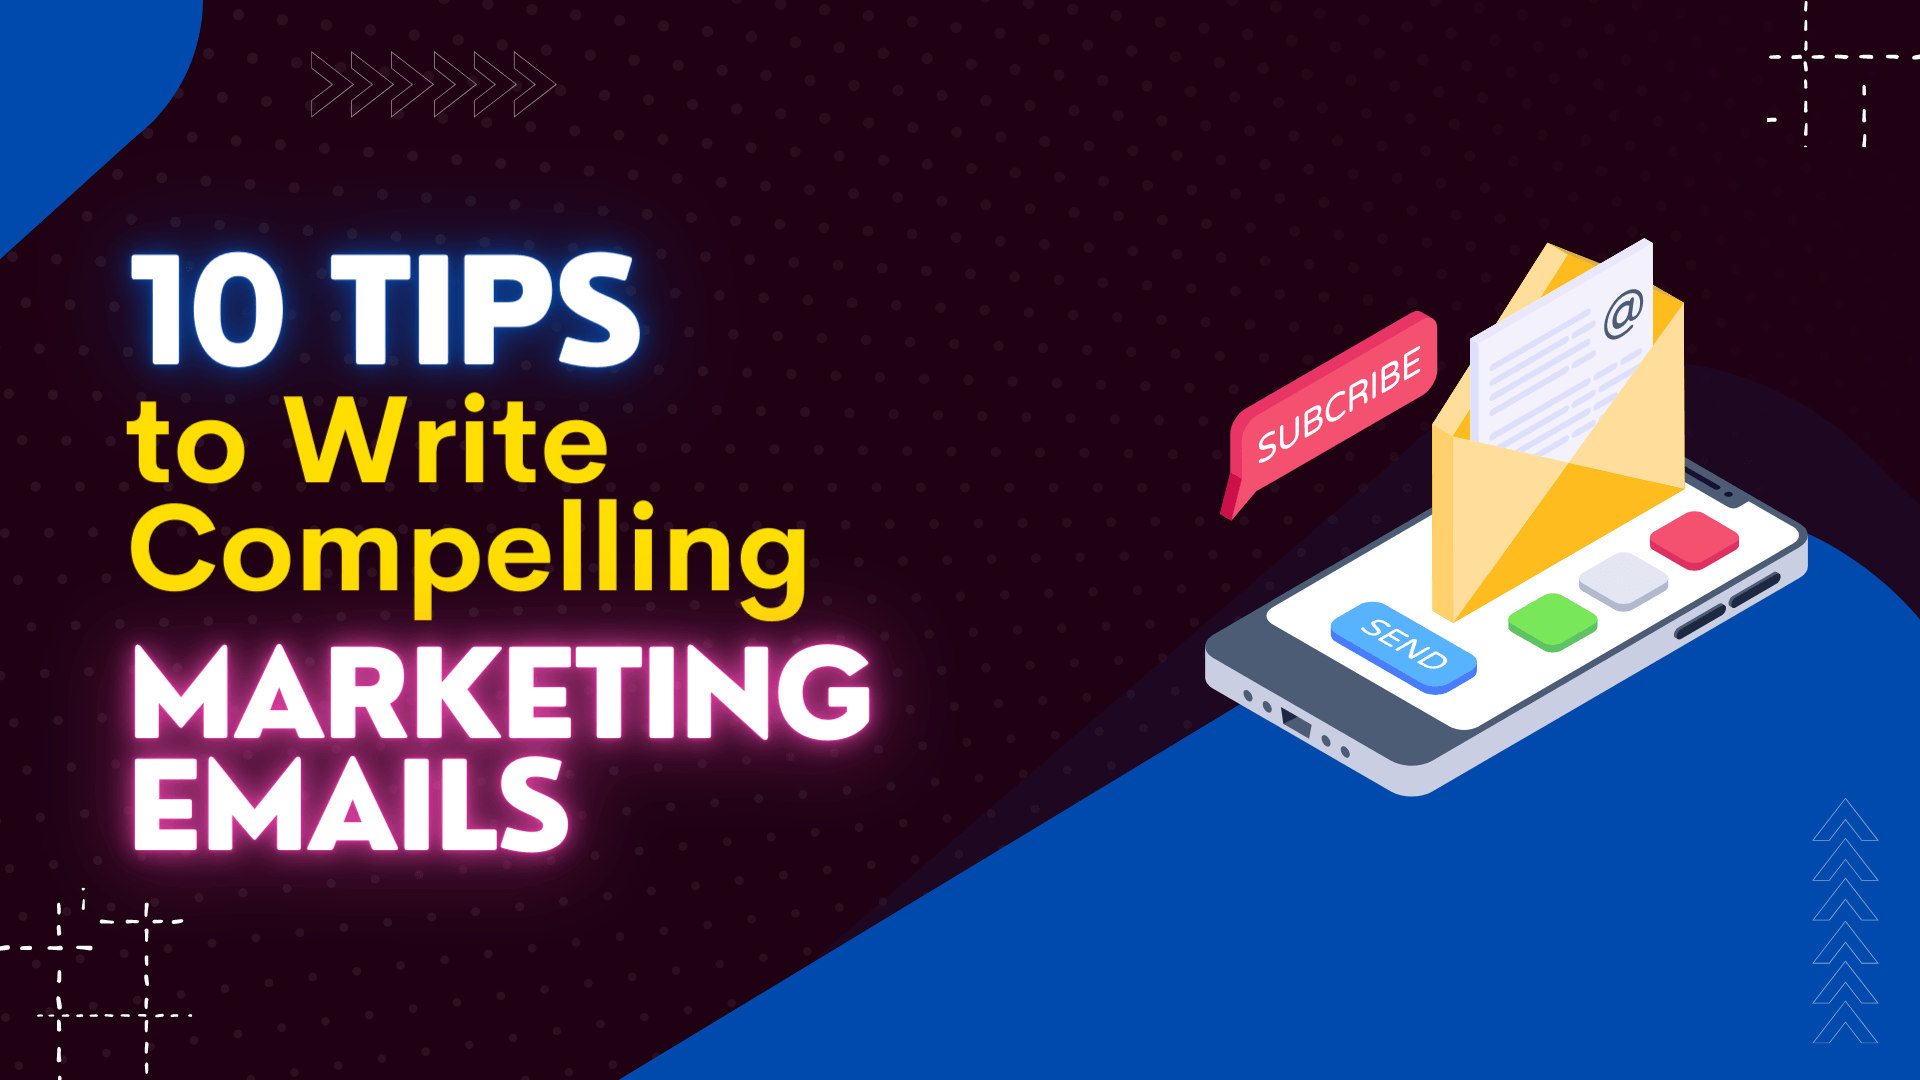 10 Tips to Write Compelling Marketing Emails